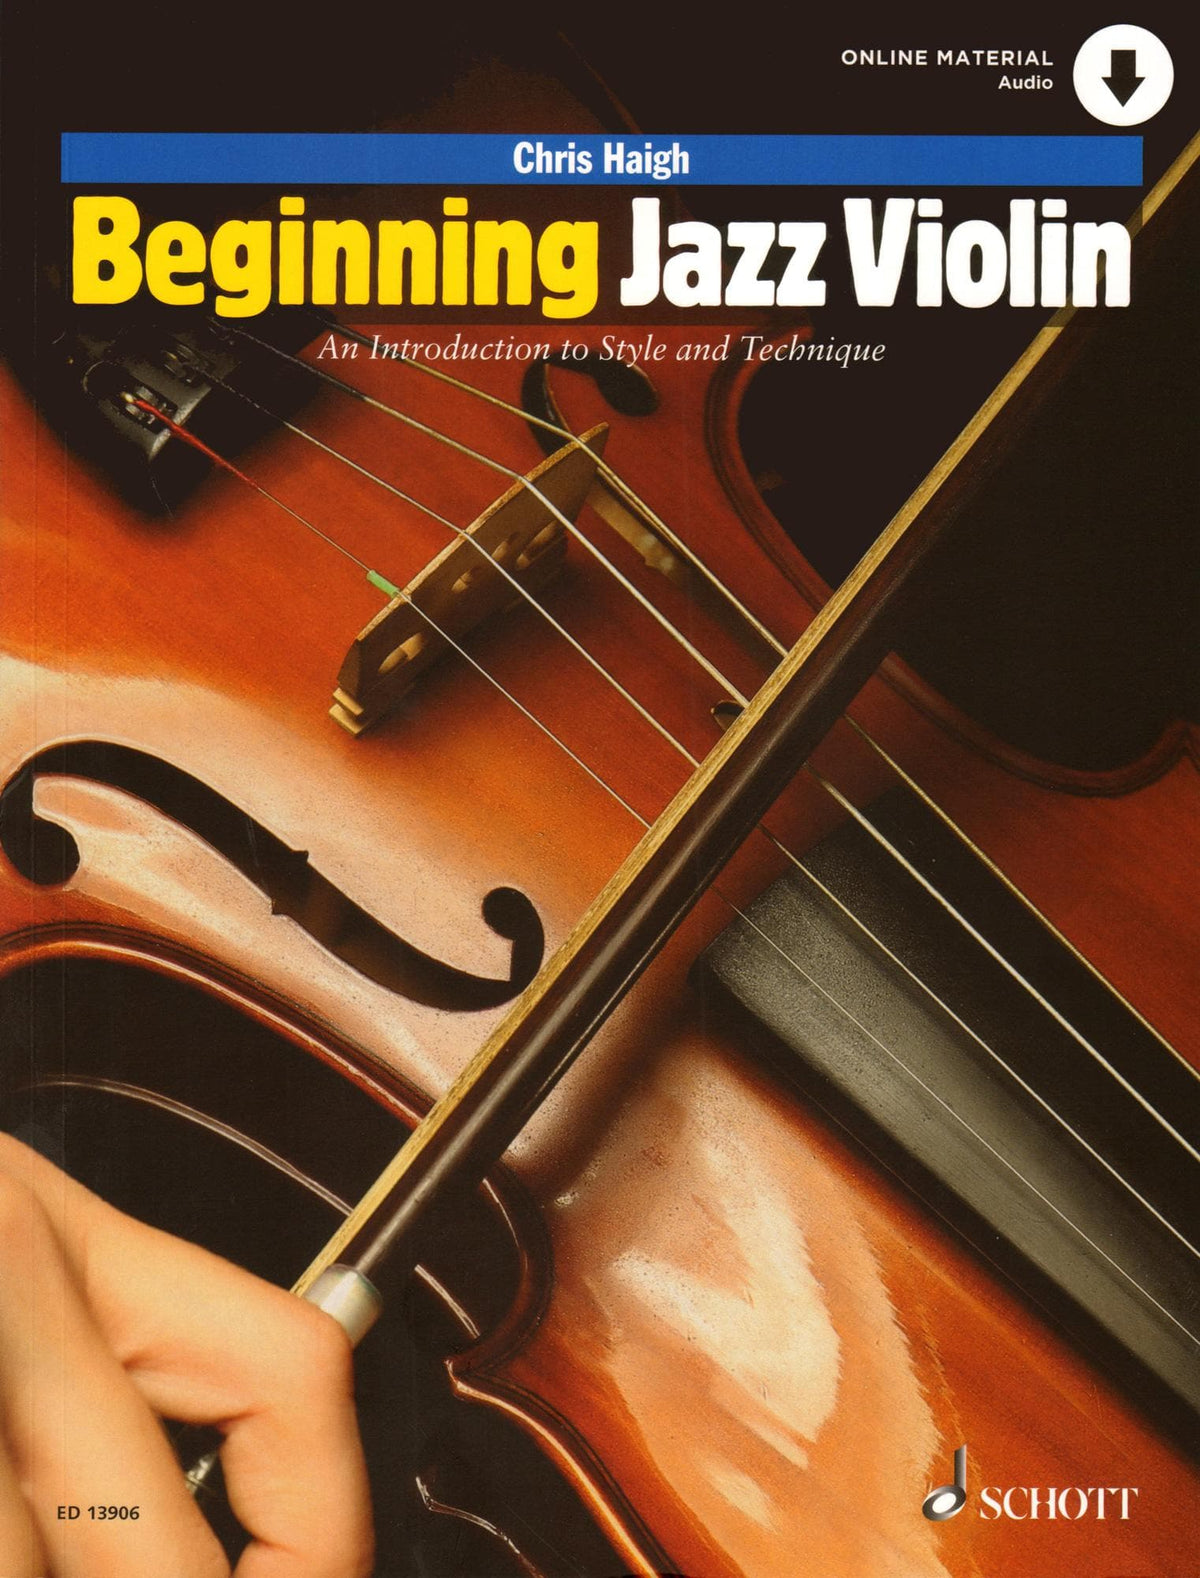 Haigh, Chris - Beginning Jazz Violin: An Introduction to Style and Technique - w/ Online Audio Access - Schott